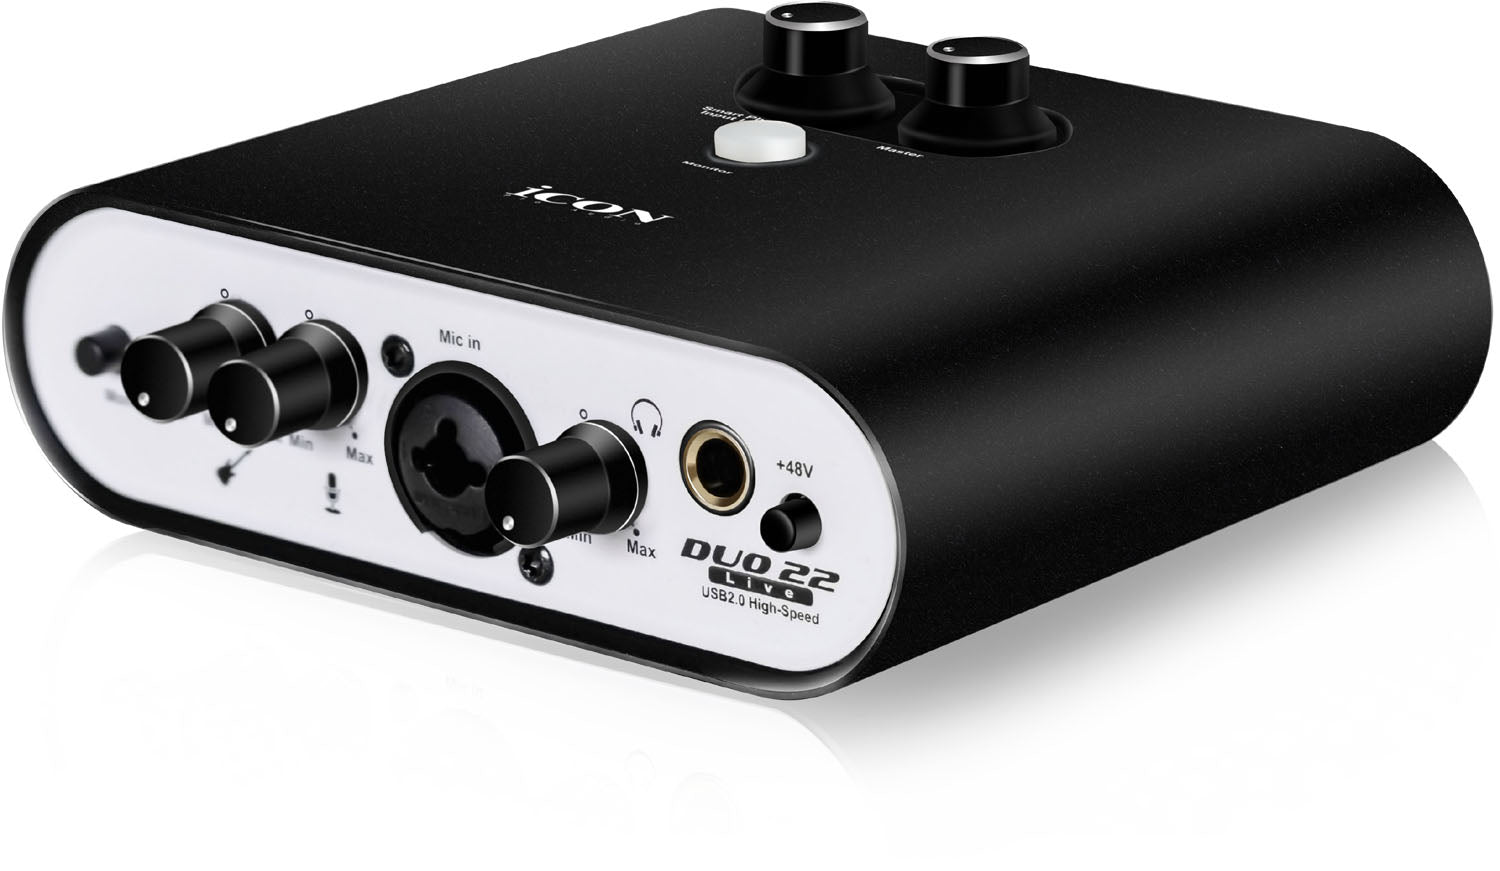 B-Stock: Icon Pro Audio Duo22 Live, Simultaneous Desktop and Mobile Connectivity Audio Streaming Interface - Hollywood DJ